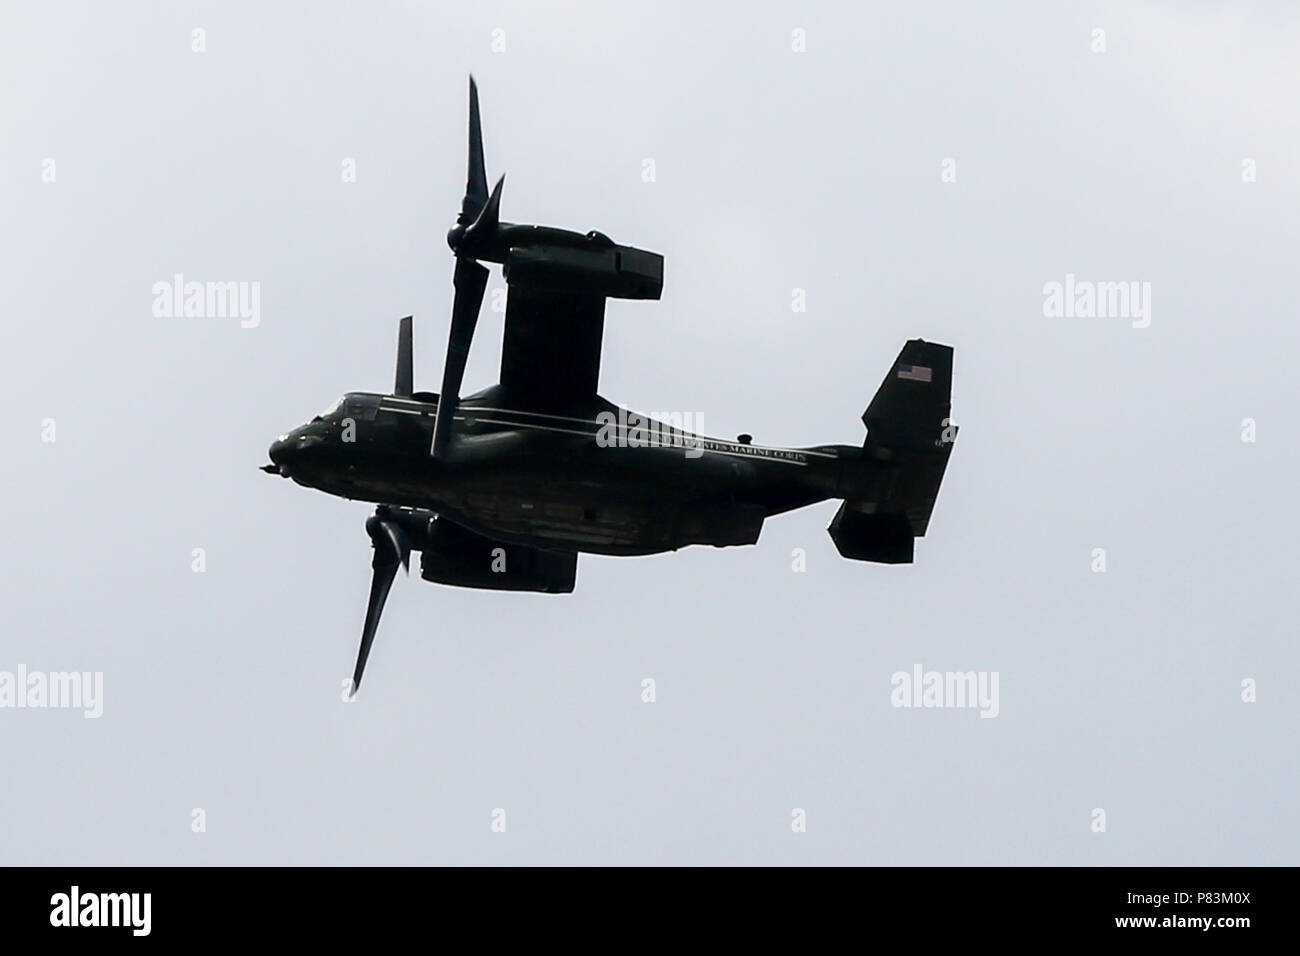 North London. UK 9 July 2018 - US Bell Boeing V-22 Osprey an American multi-mission, tiltrotor military aircrafts over North London in advance of US President Donald Trump's visit to London later this week.  Credit: Dinendra Haria/Alamy Live News Stock Photo